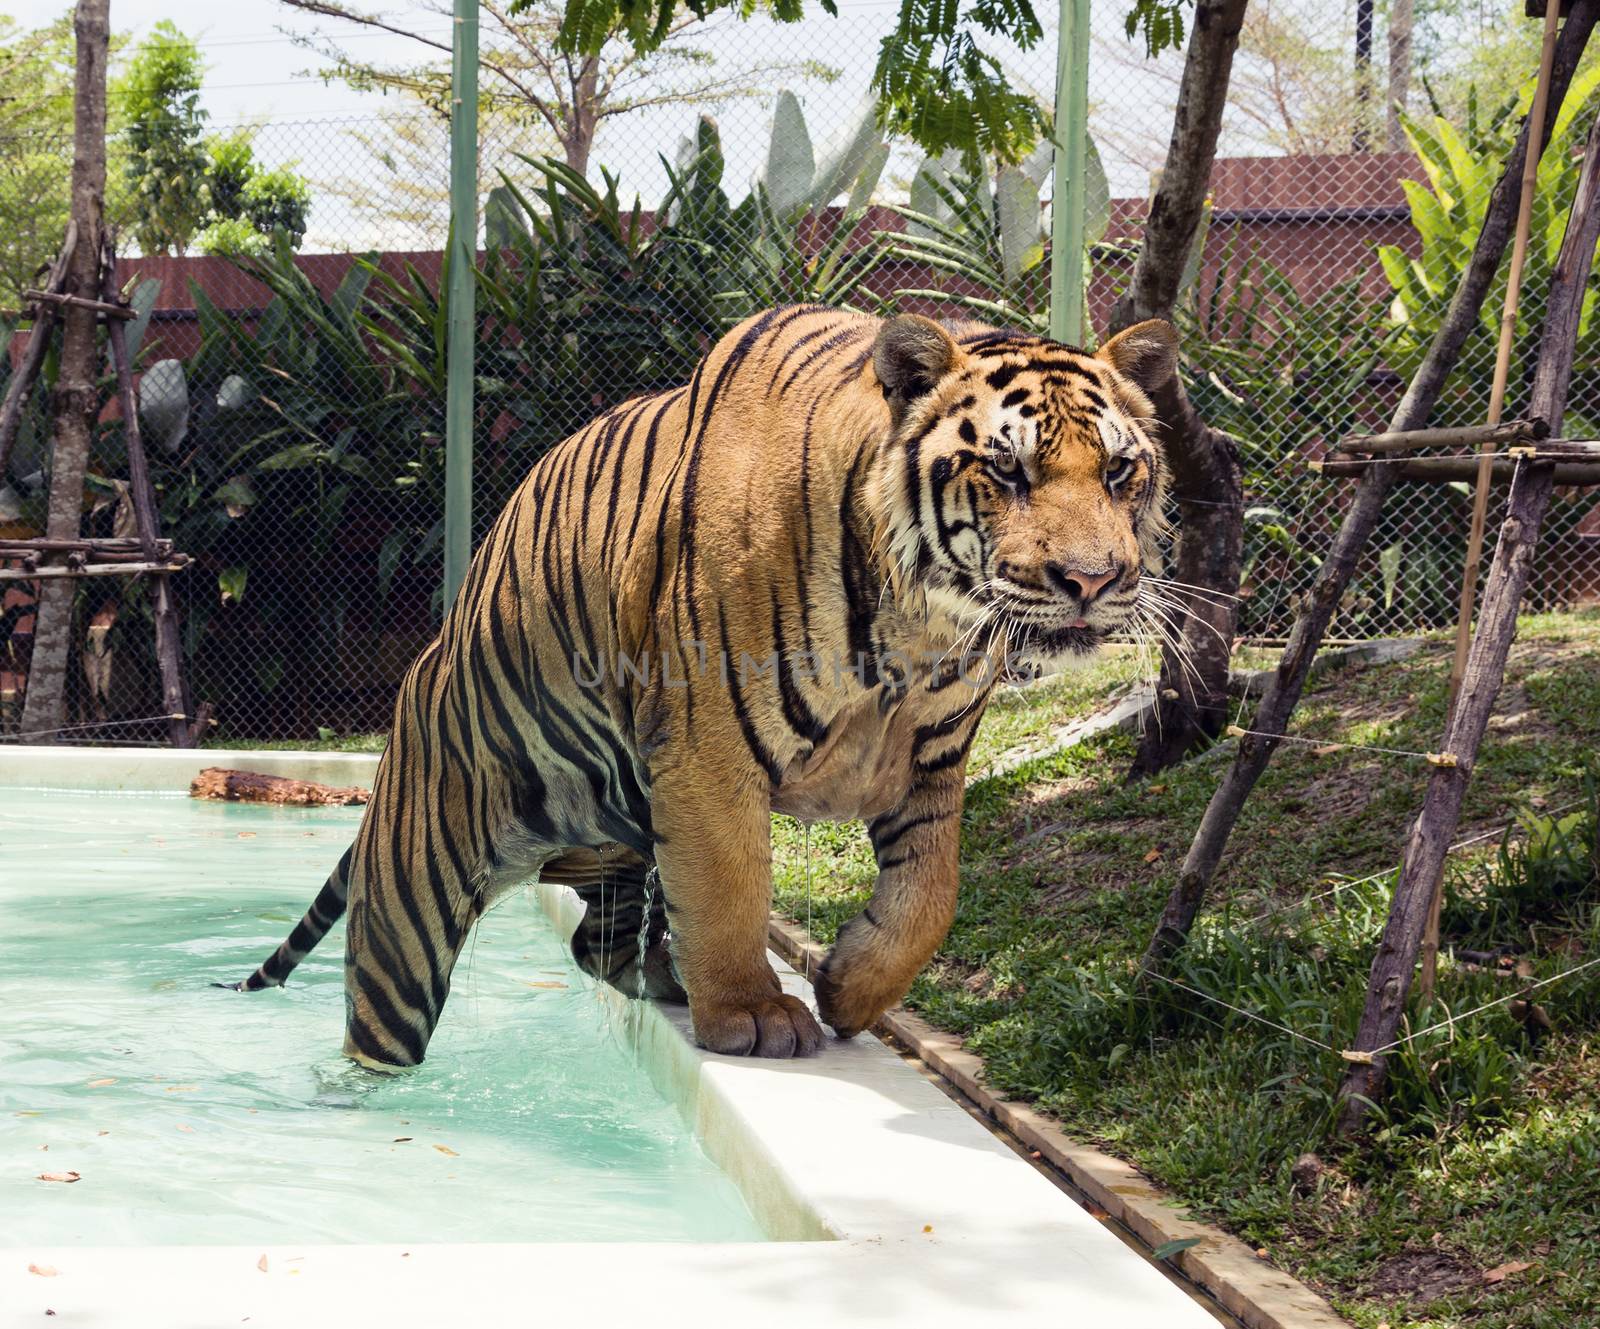 Tiger coming out of the pool